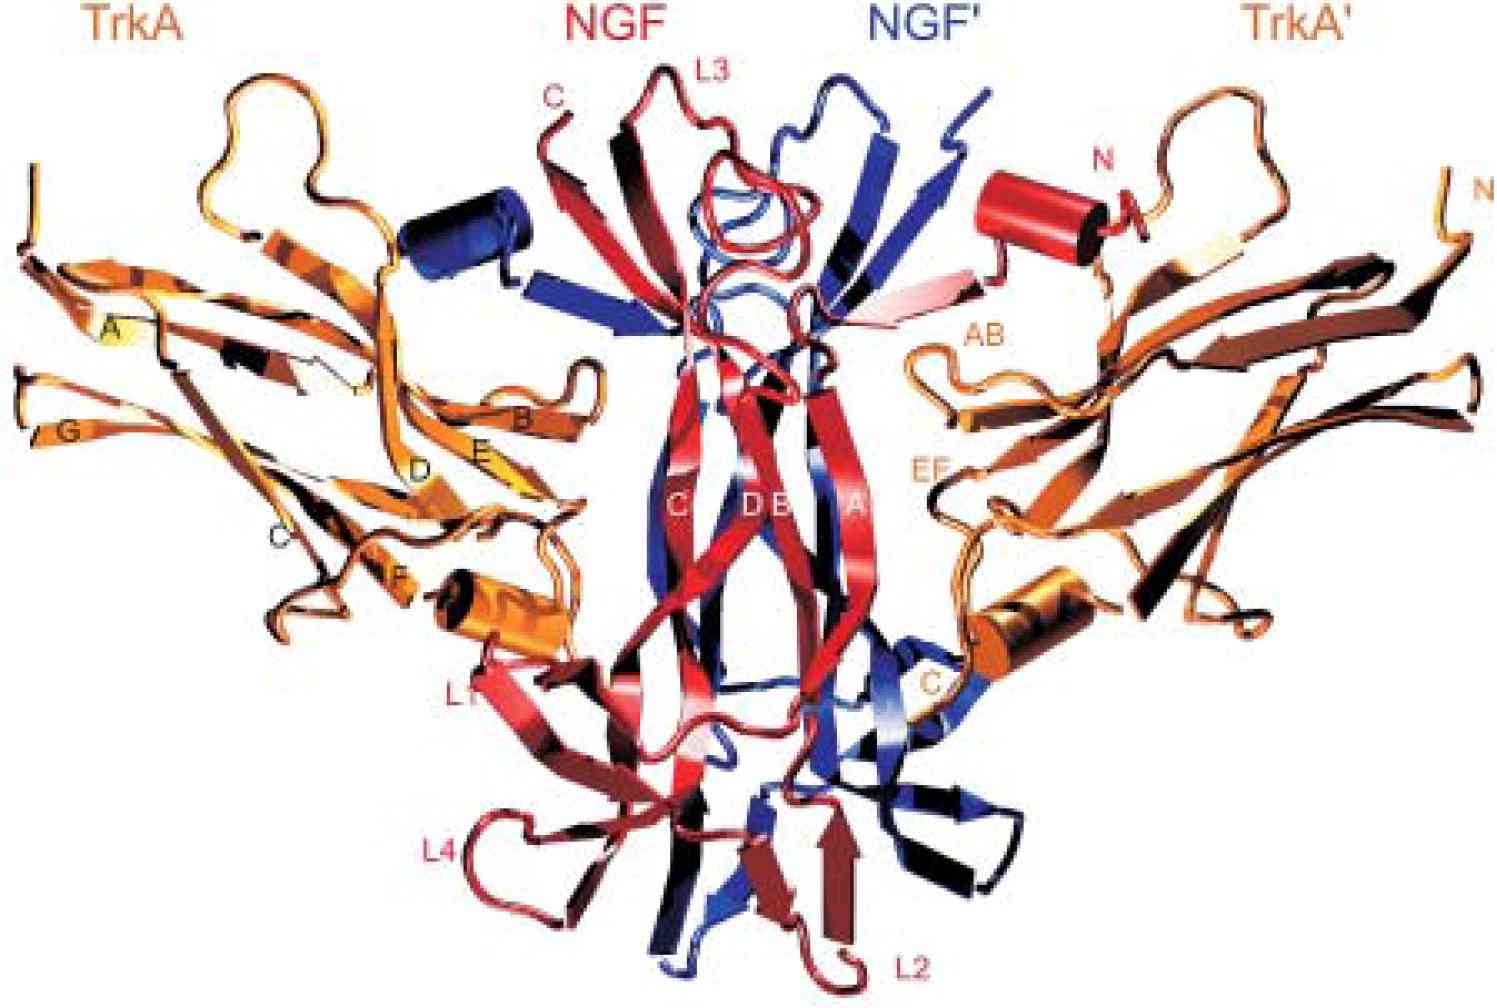 Three-dimensional structure of the complex formed by NGF homodimers and two TrkA domain 5. (Settanni, G., et al. 2003)